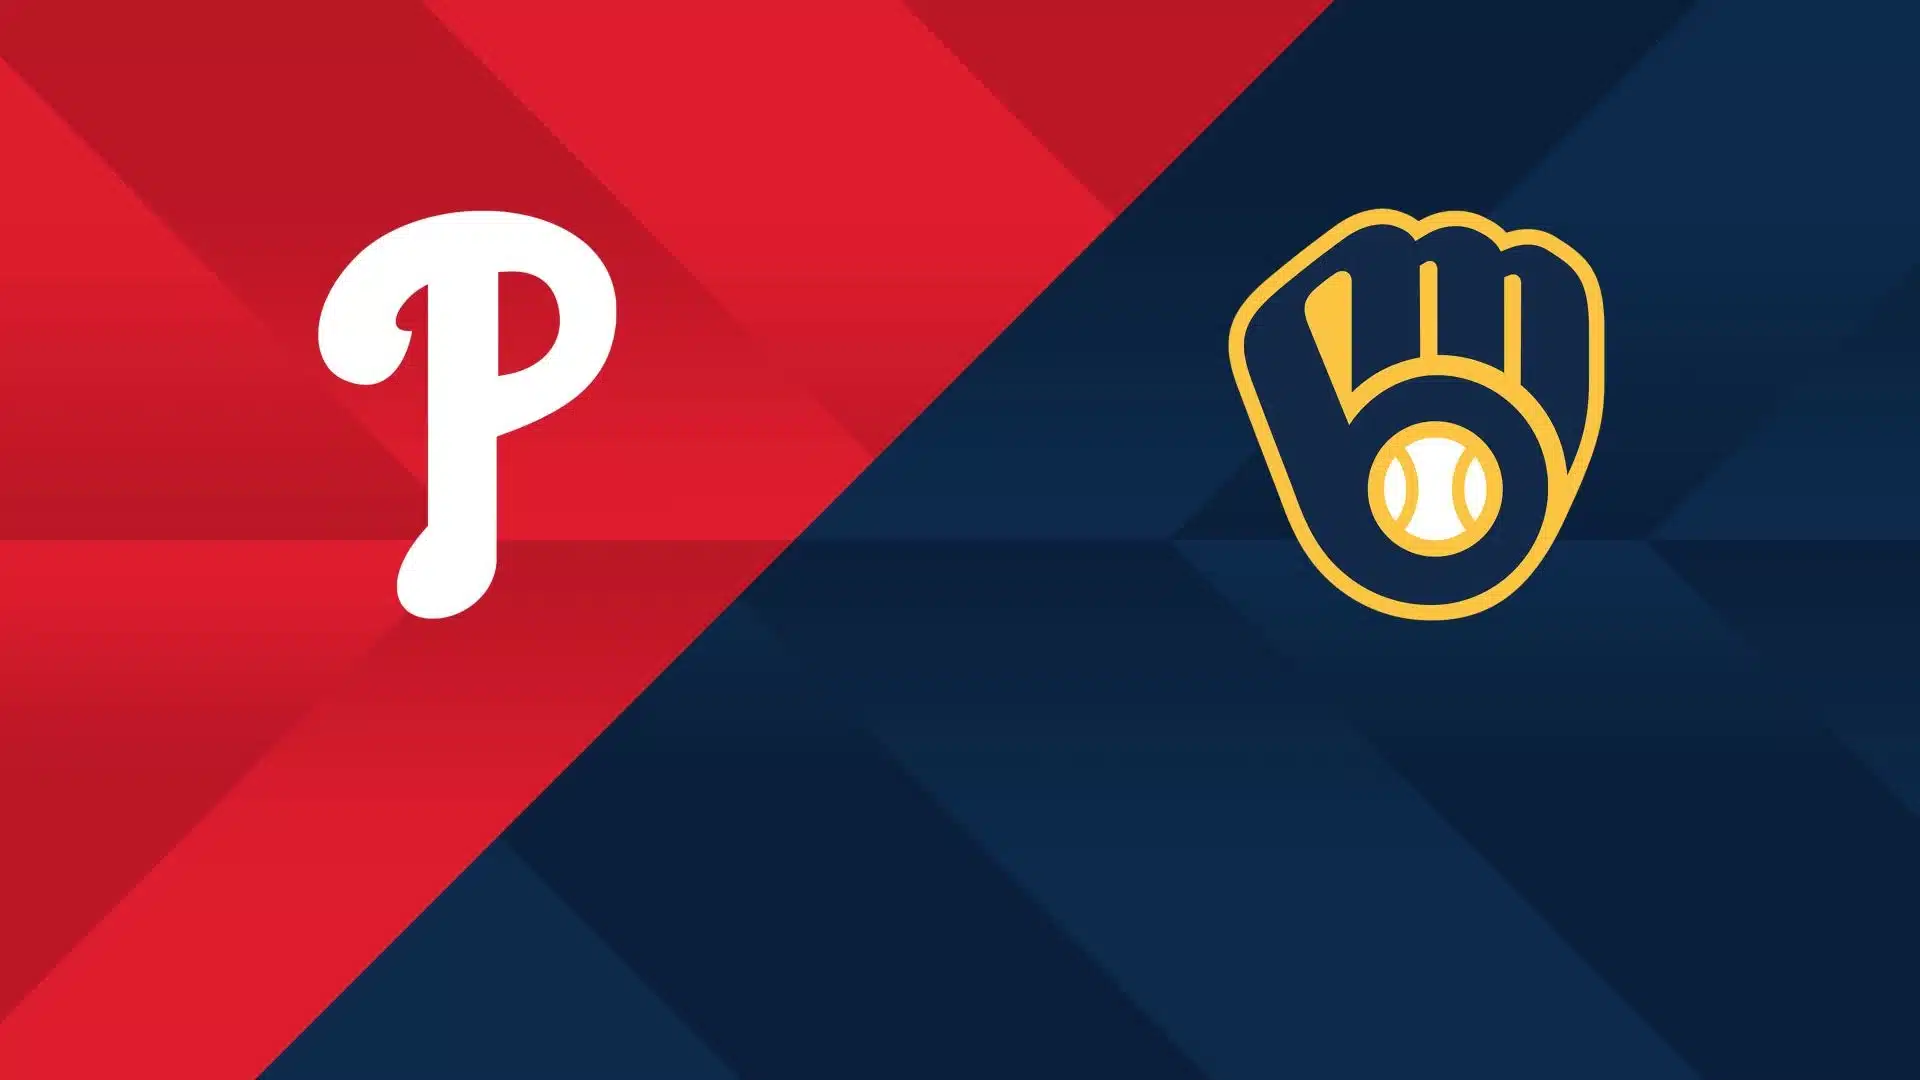 Phillies vs. Brewers: Probable Pitchers, Team Leaders, and More!